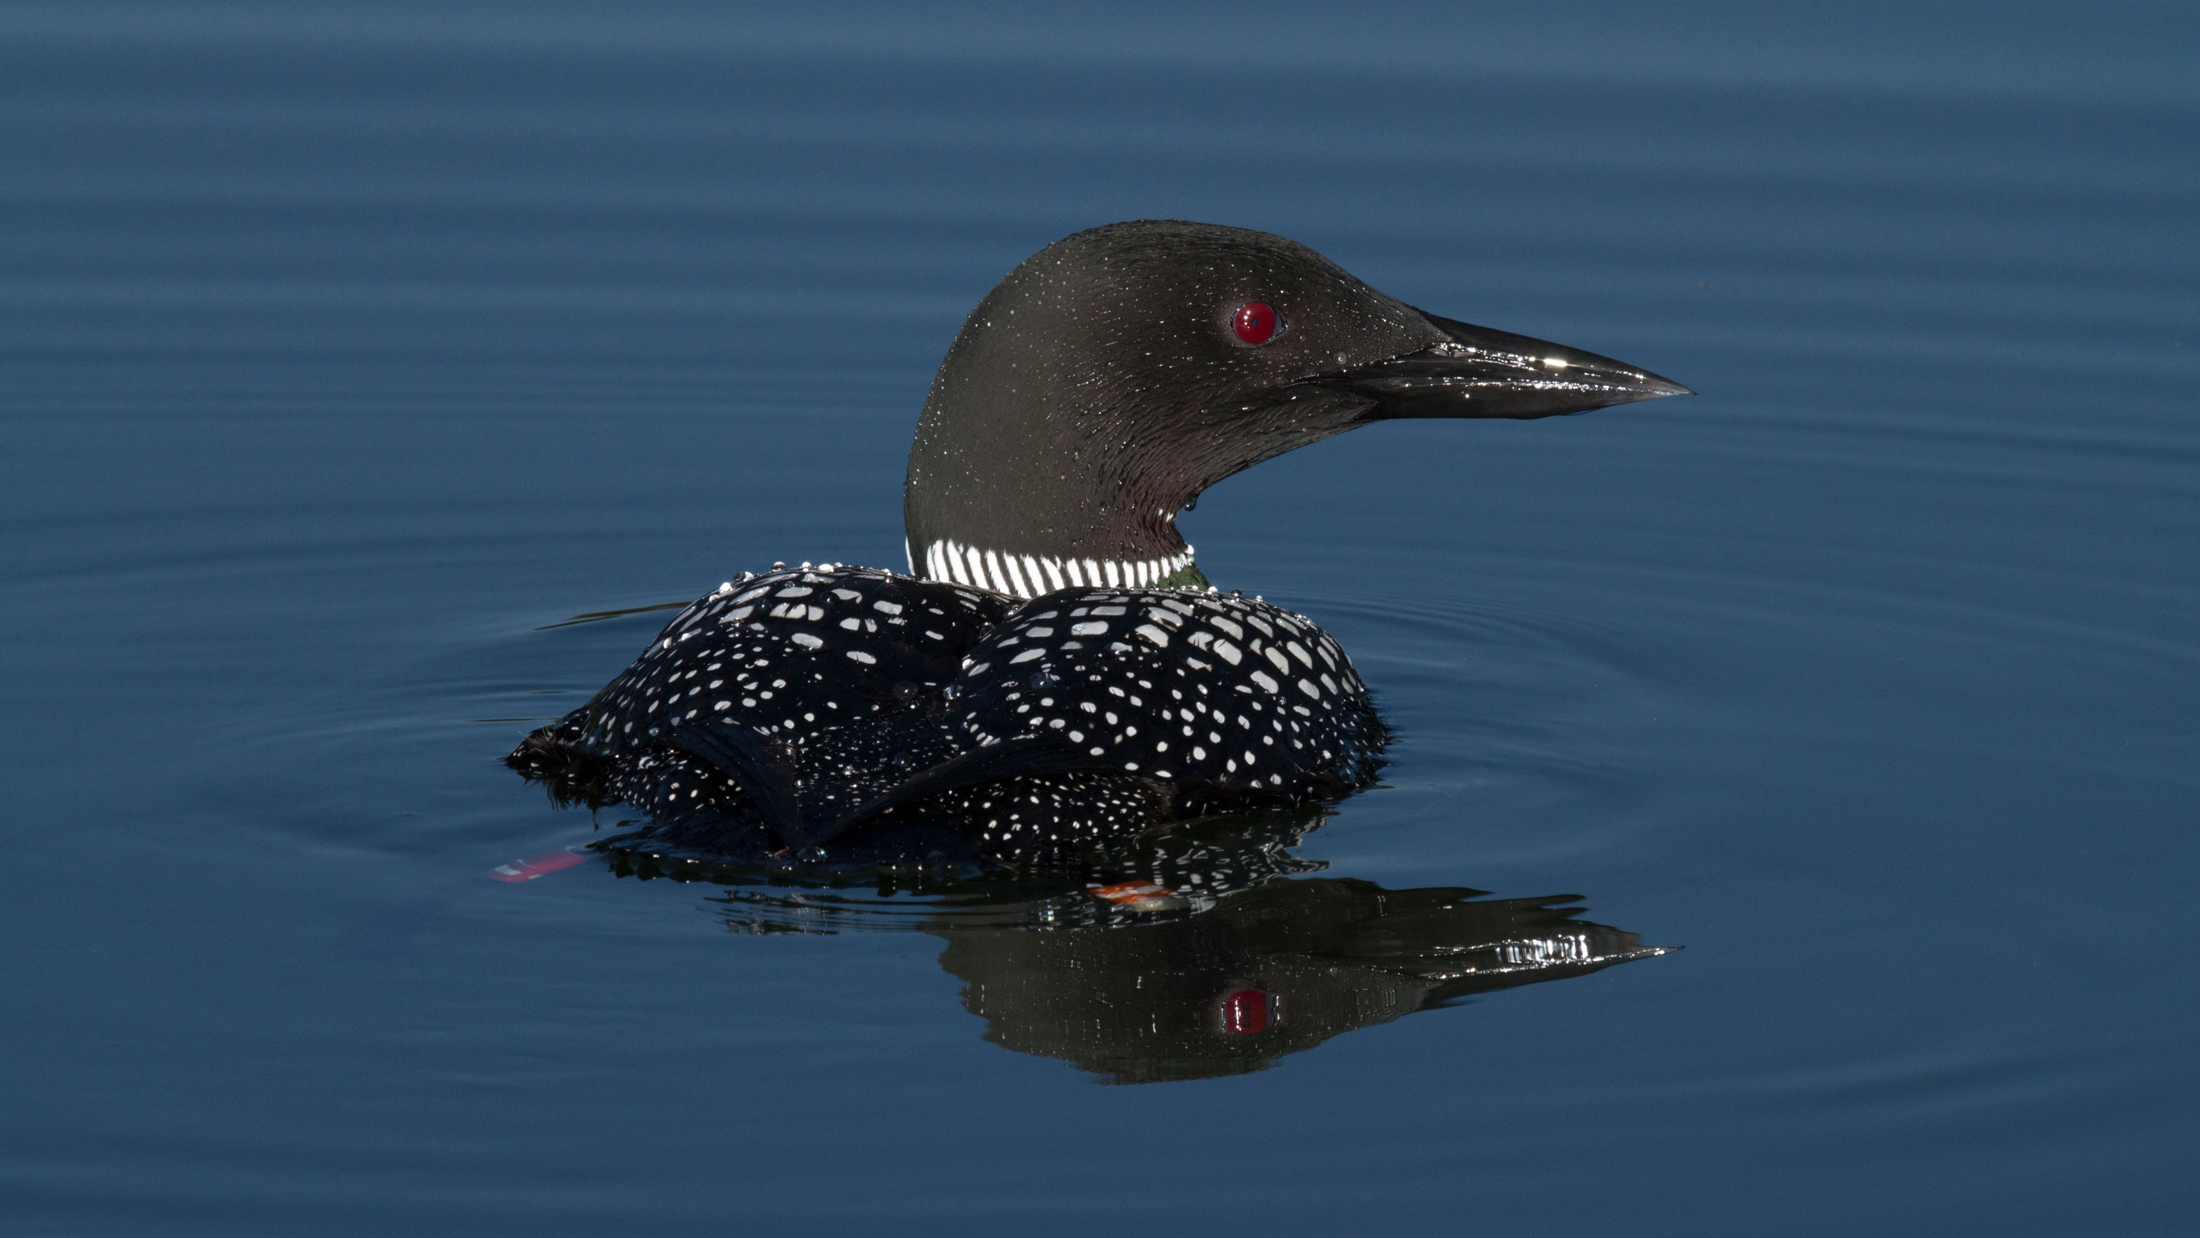 A long-term territorial male Common Loon shows its legband colors. Banding provides identification for research studies of the species. Common Loons are banded each year in a number of states by Biodiversity Research Institute and its associates. Photo © Daniel and Ginger Poleschook